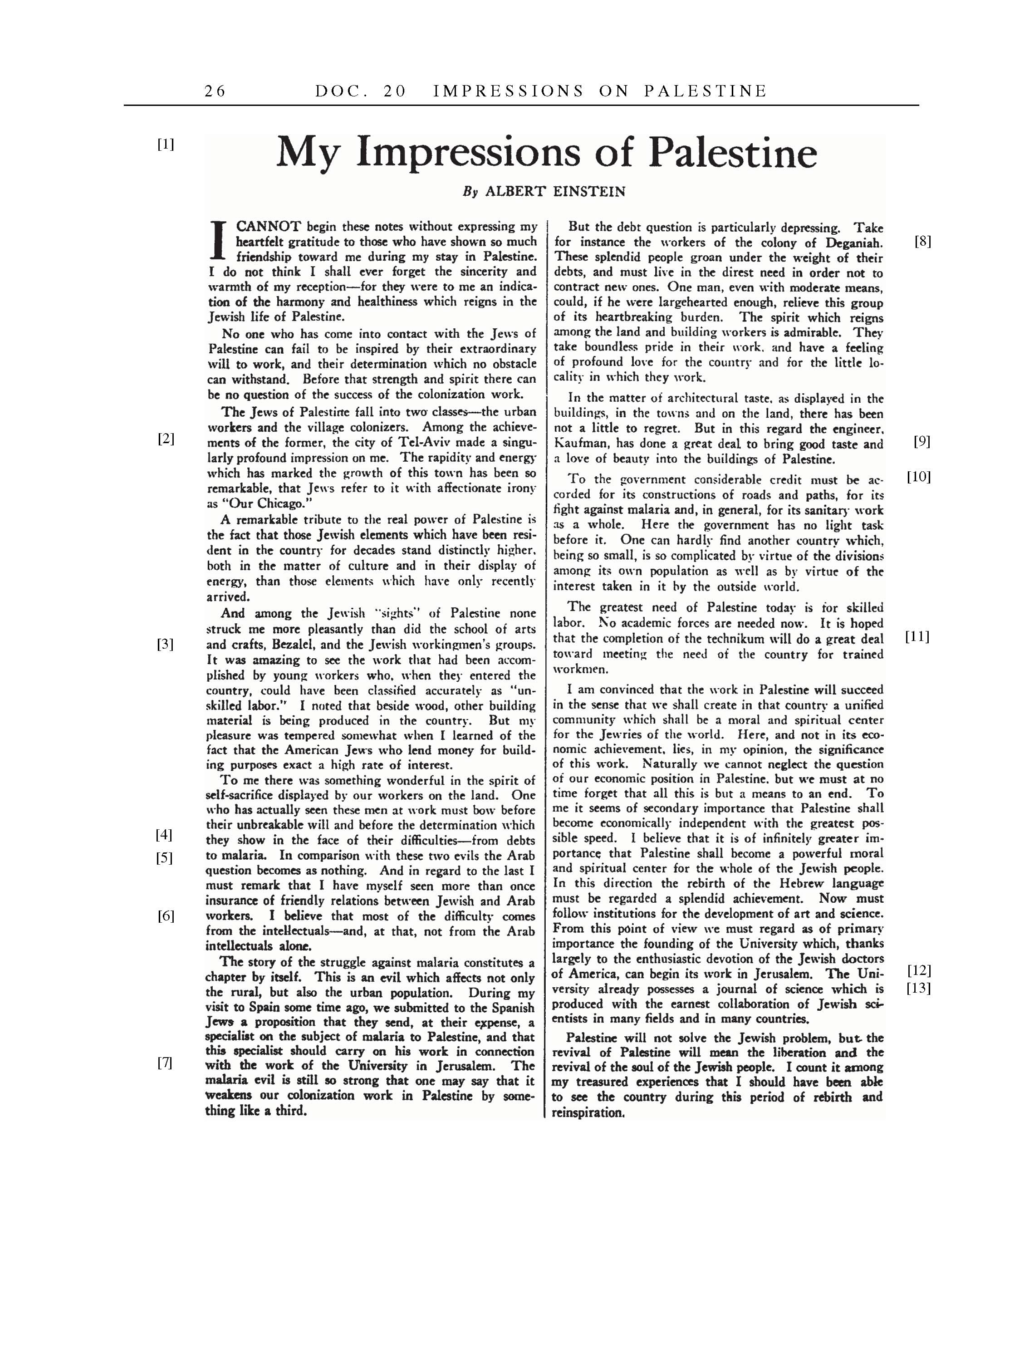 Volume 14: The Berlin Years: Writings & Correspondence, April 1923-May 1925 (English Translation Supplement) page 26